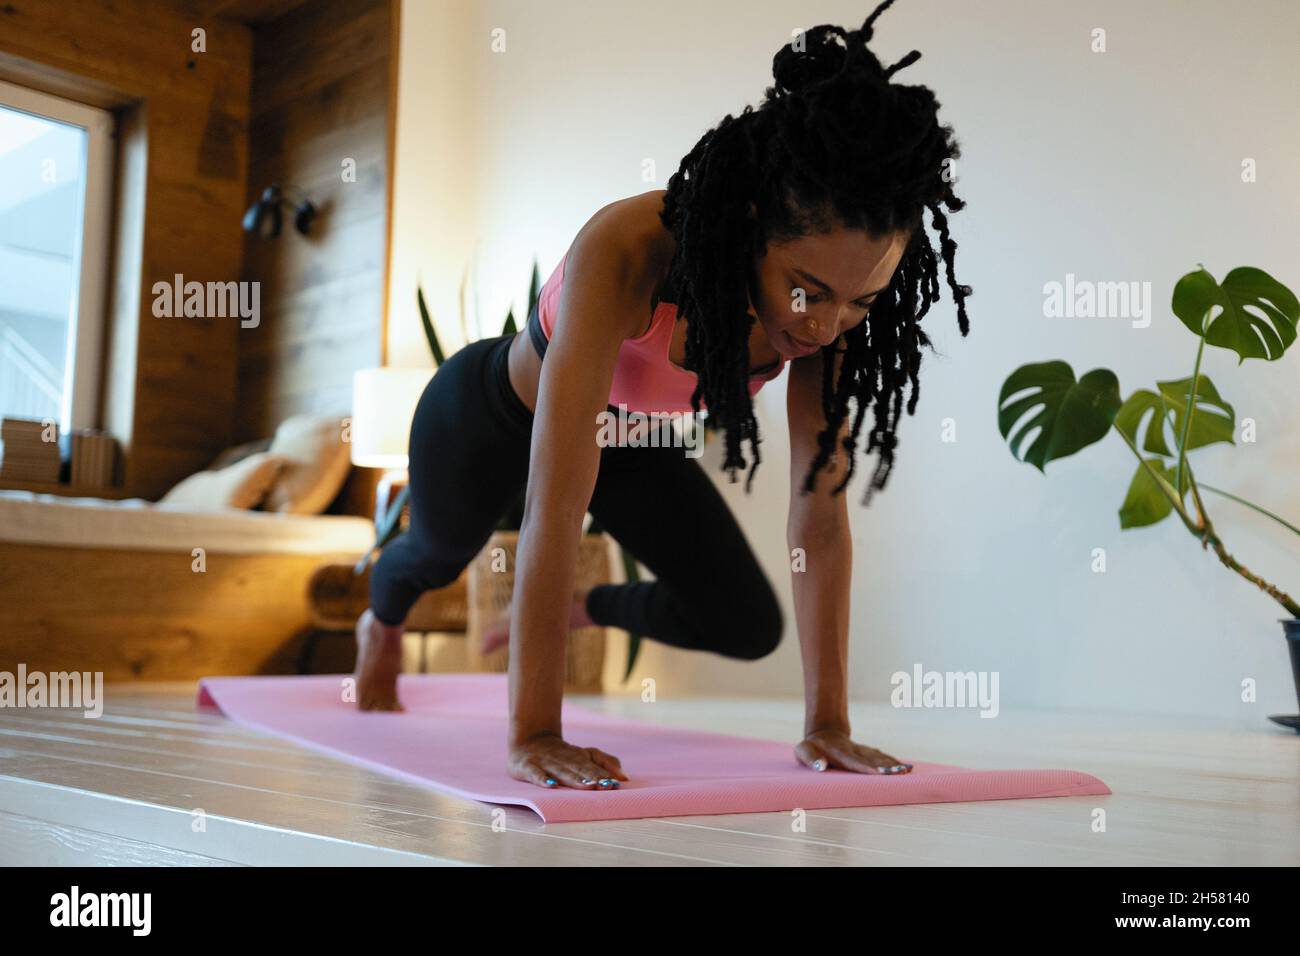 Strong Beautiful Fitness Girl in Athletic Workout Clothes is Doing a Plank Exercise. She is Training at Home in Her Living Room with Cozy Interior. Stock Photo